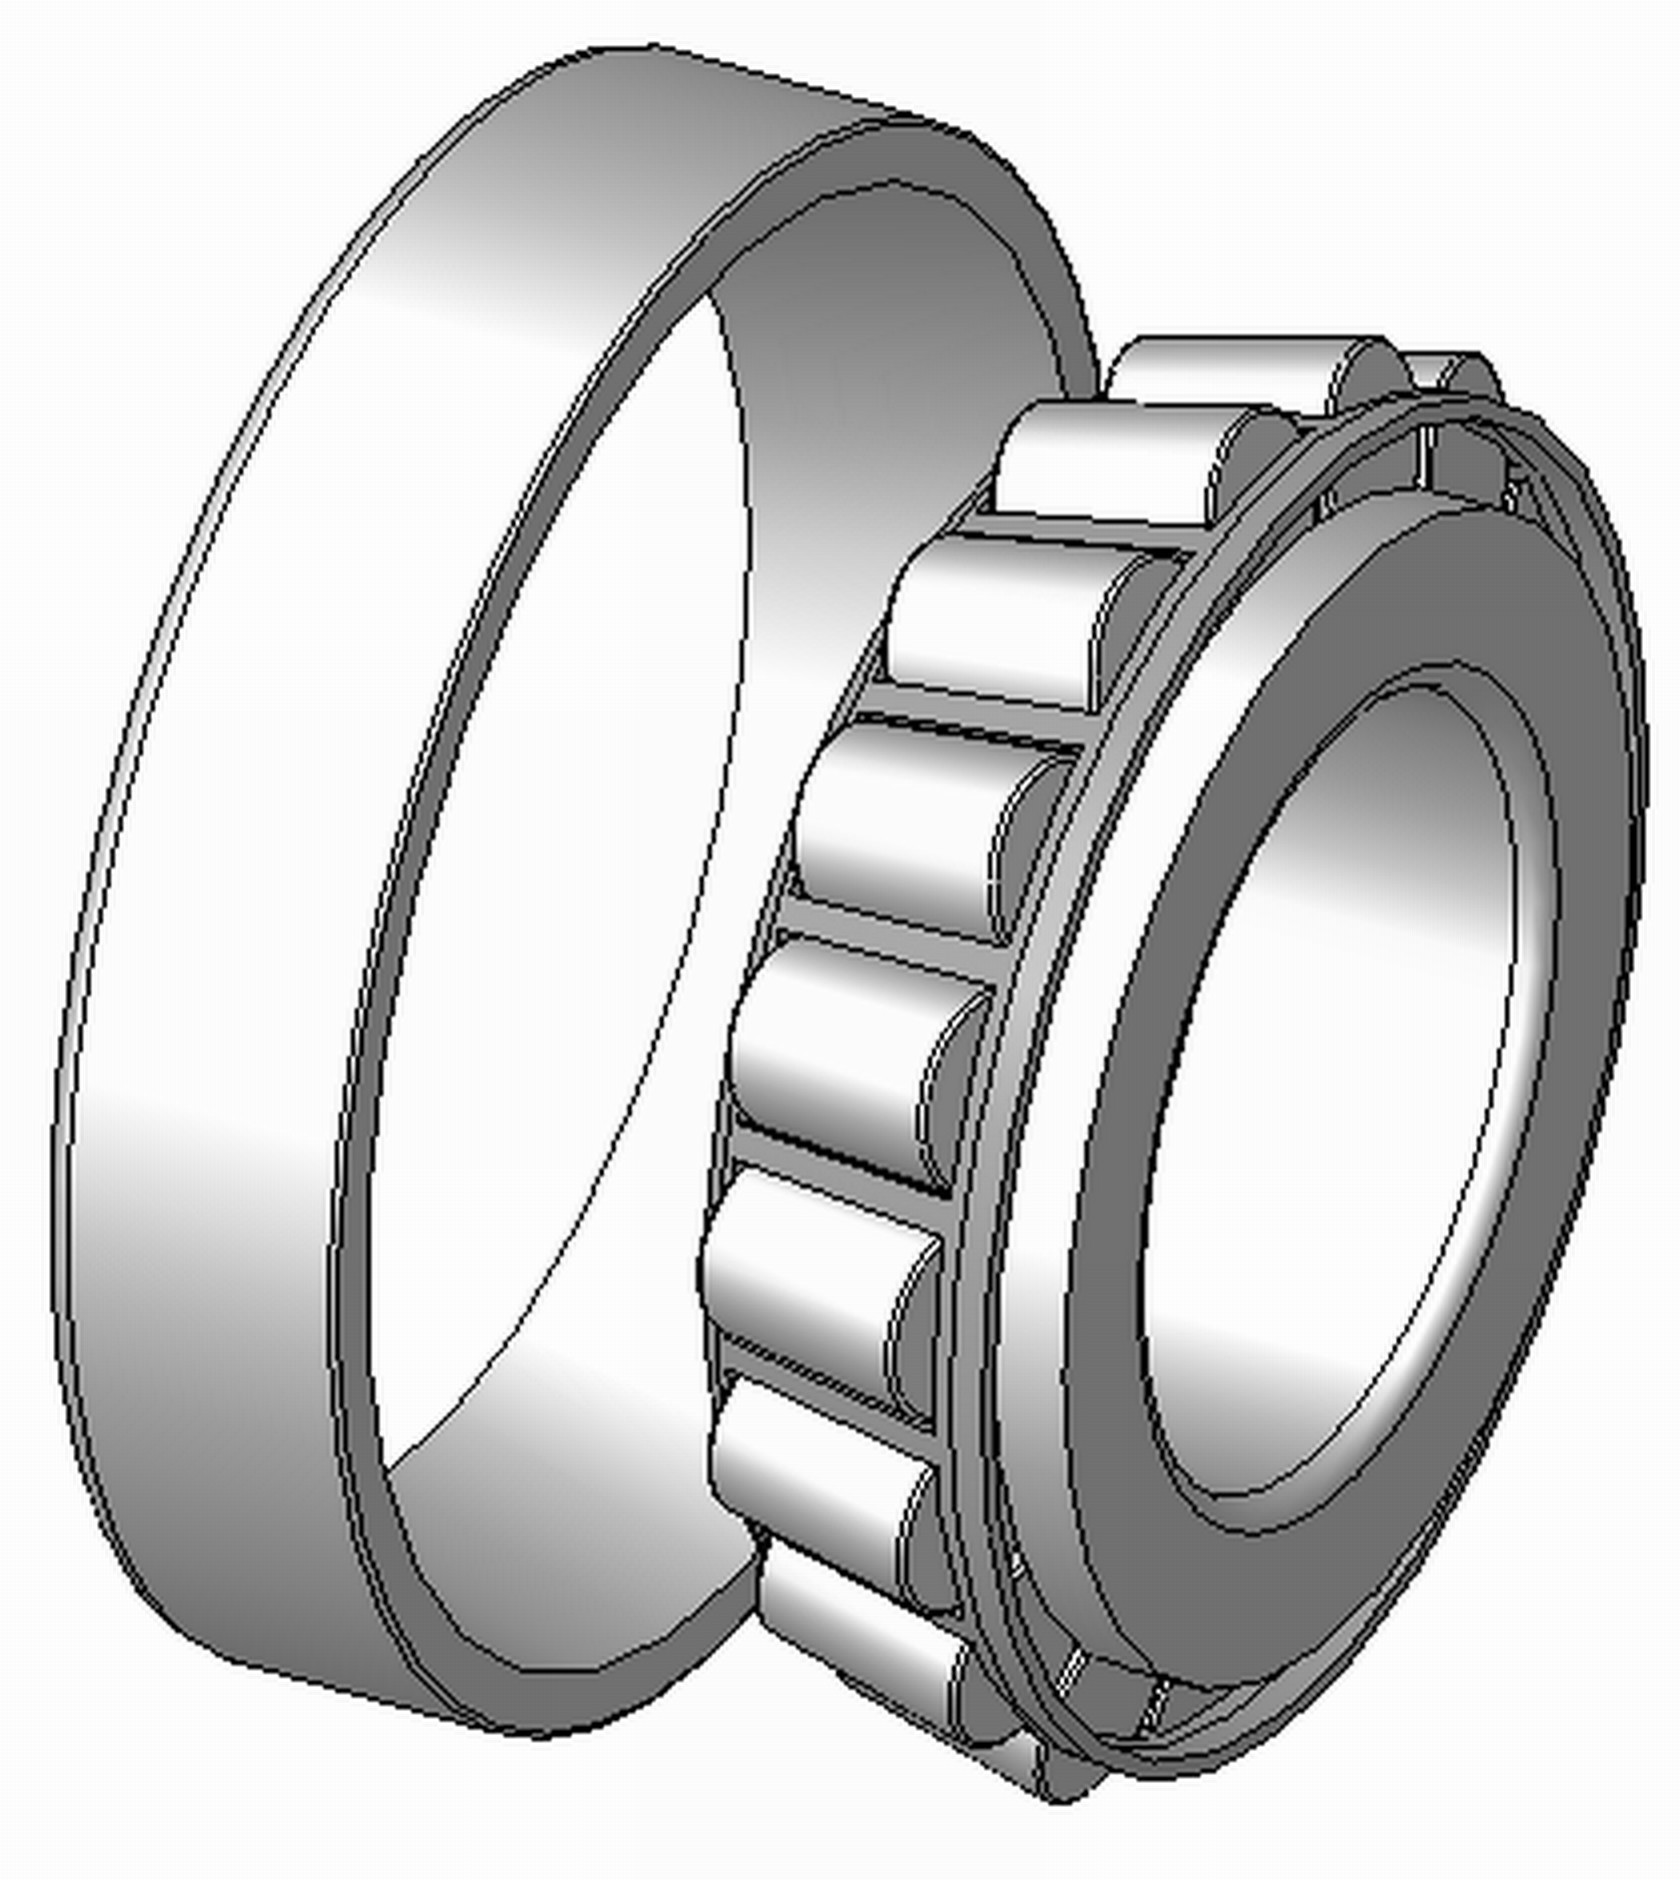 Trailer Axle Bearing Diagram Tapered Roller Bearing Of Trailer Axle Bearing Diagram